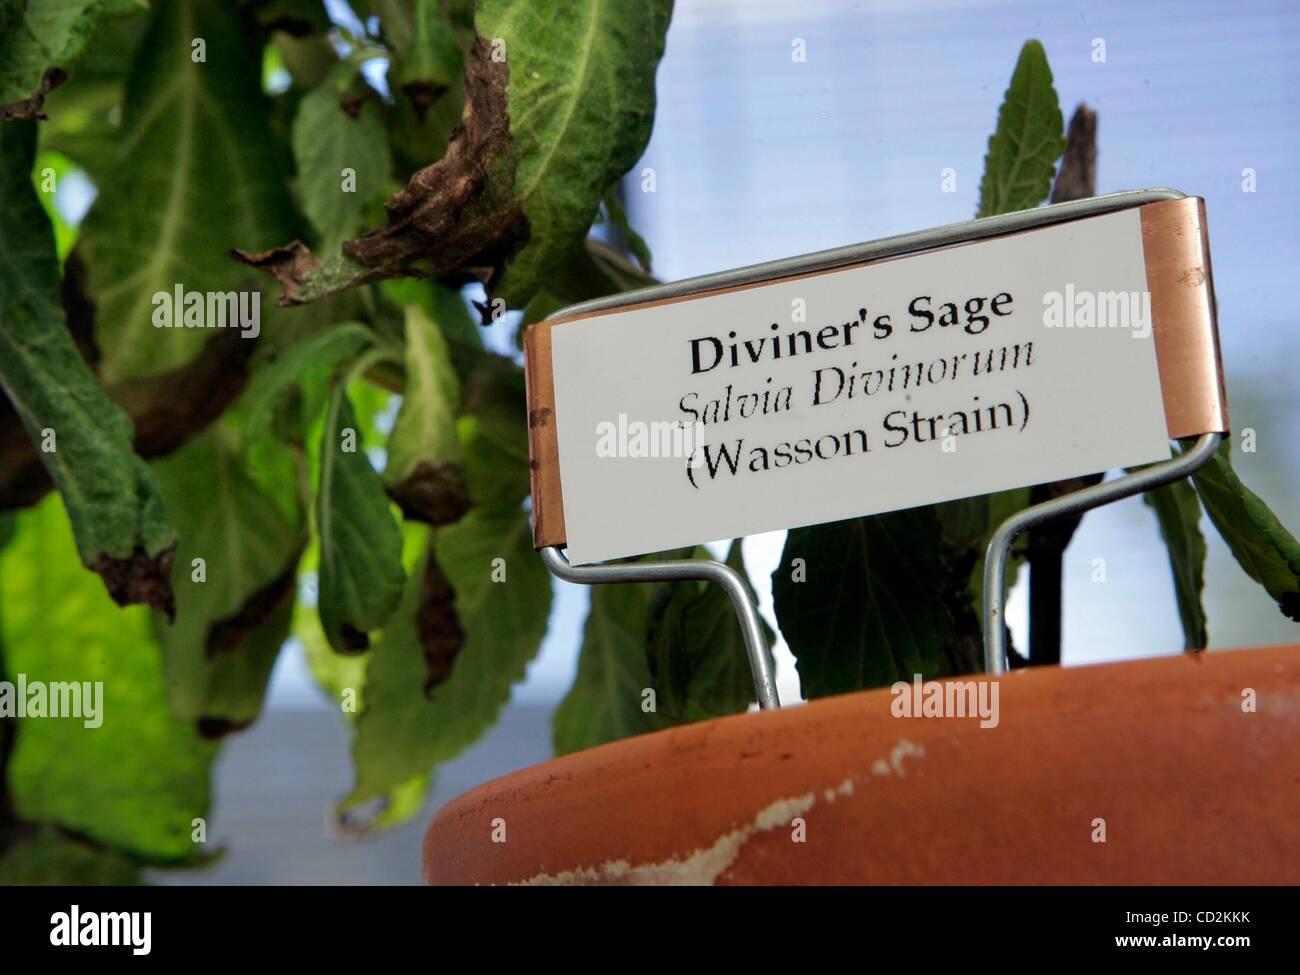 Mar 11, 2008 - San Diego, California, USA - Detail view of a salvia divinorum plant witt a label showing it common name growing in the office of SDSU researcher James Lange. (Credit Image: Â© Charlie Neuman/San Diego Union Tribune/ZUMA Press) RESTRICTIONS: * USA Tabloids Rights OUT * Stock Photo